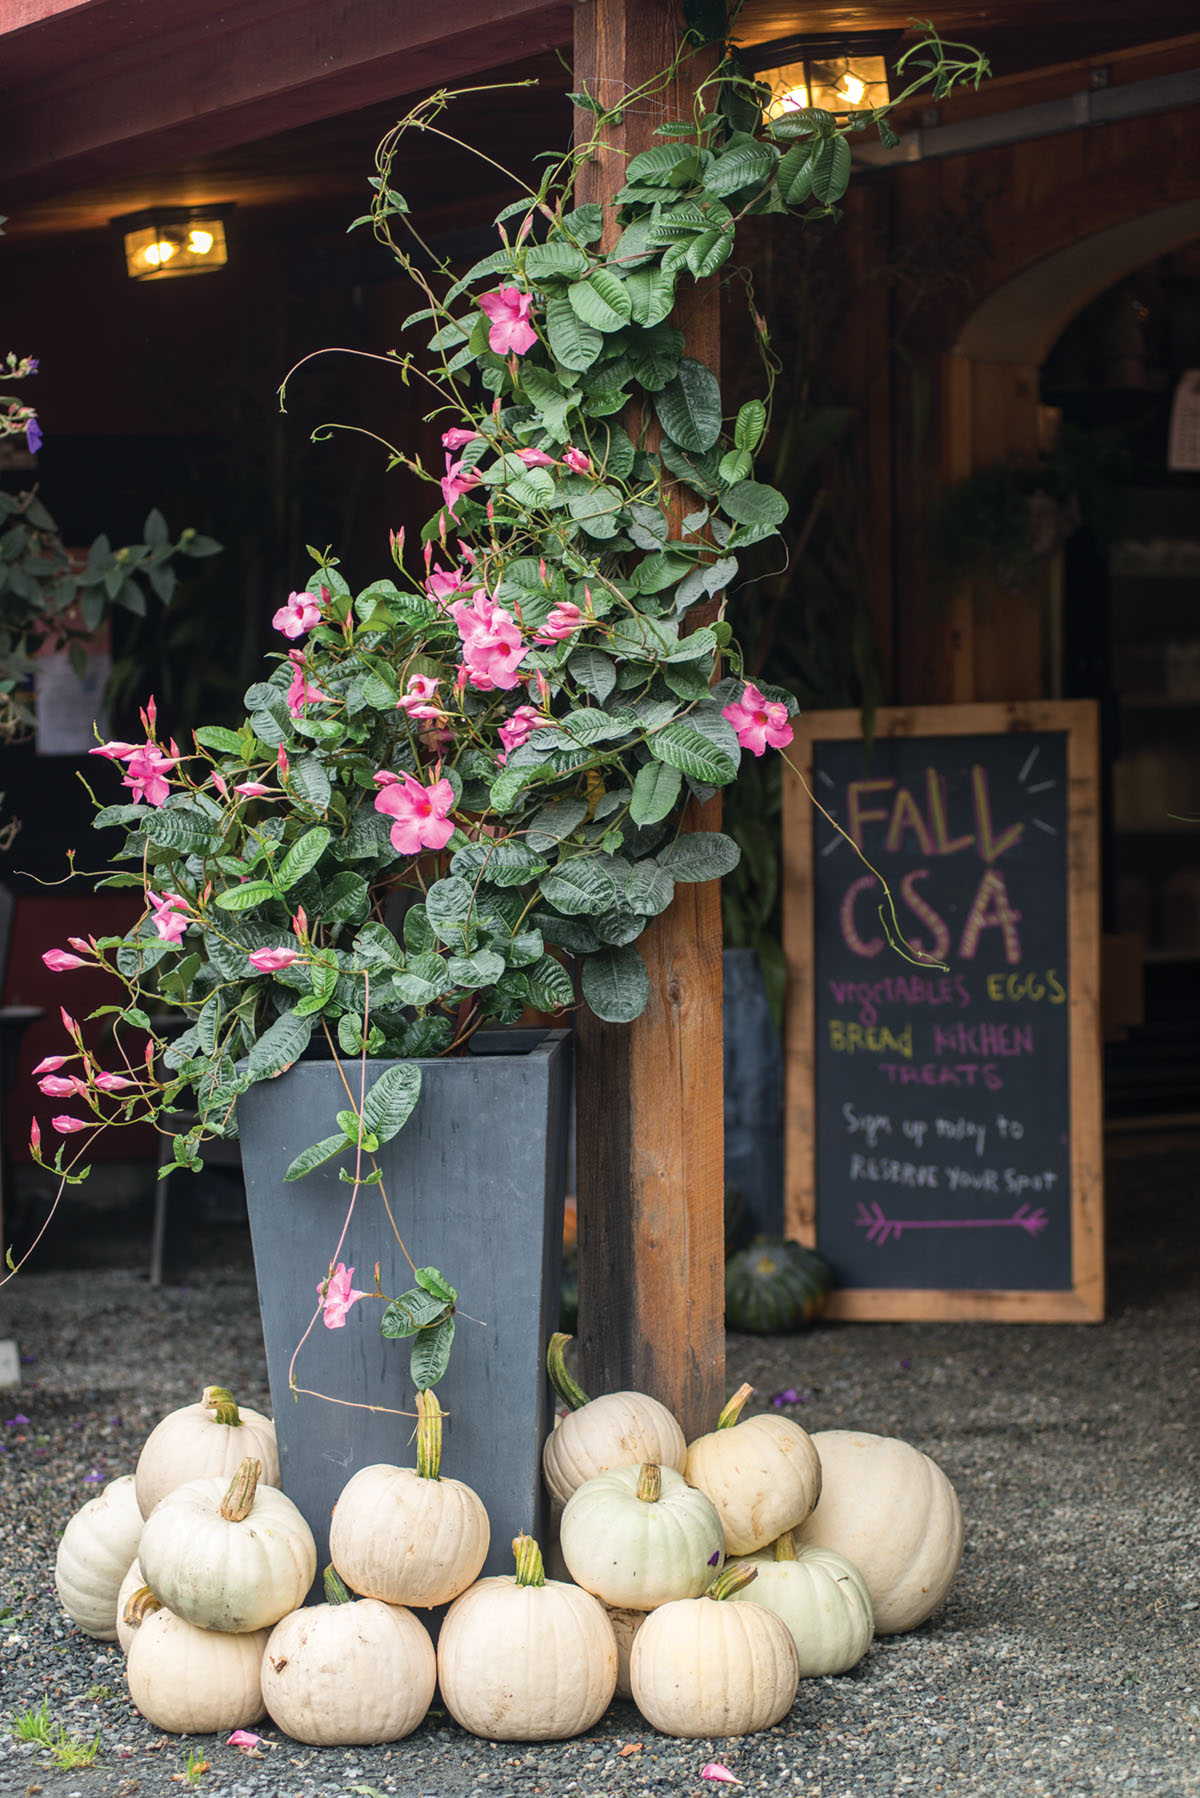 Vignette of cream-colored pumpkins and a container featuring a pink flowering vine. A chalk sign in the background advertises Edgewater Farm's fall CSA, listing vegetables, eggs, bread, and kitchen treats